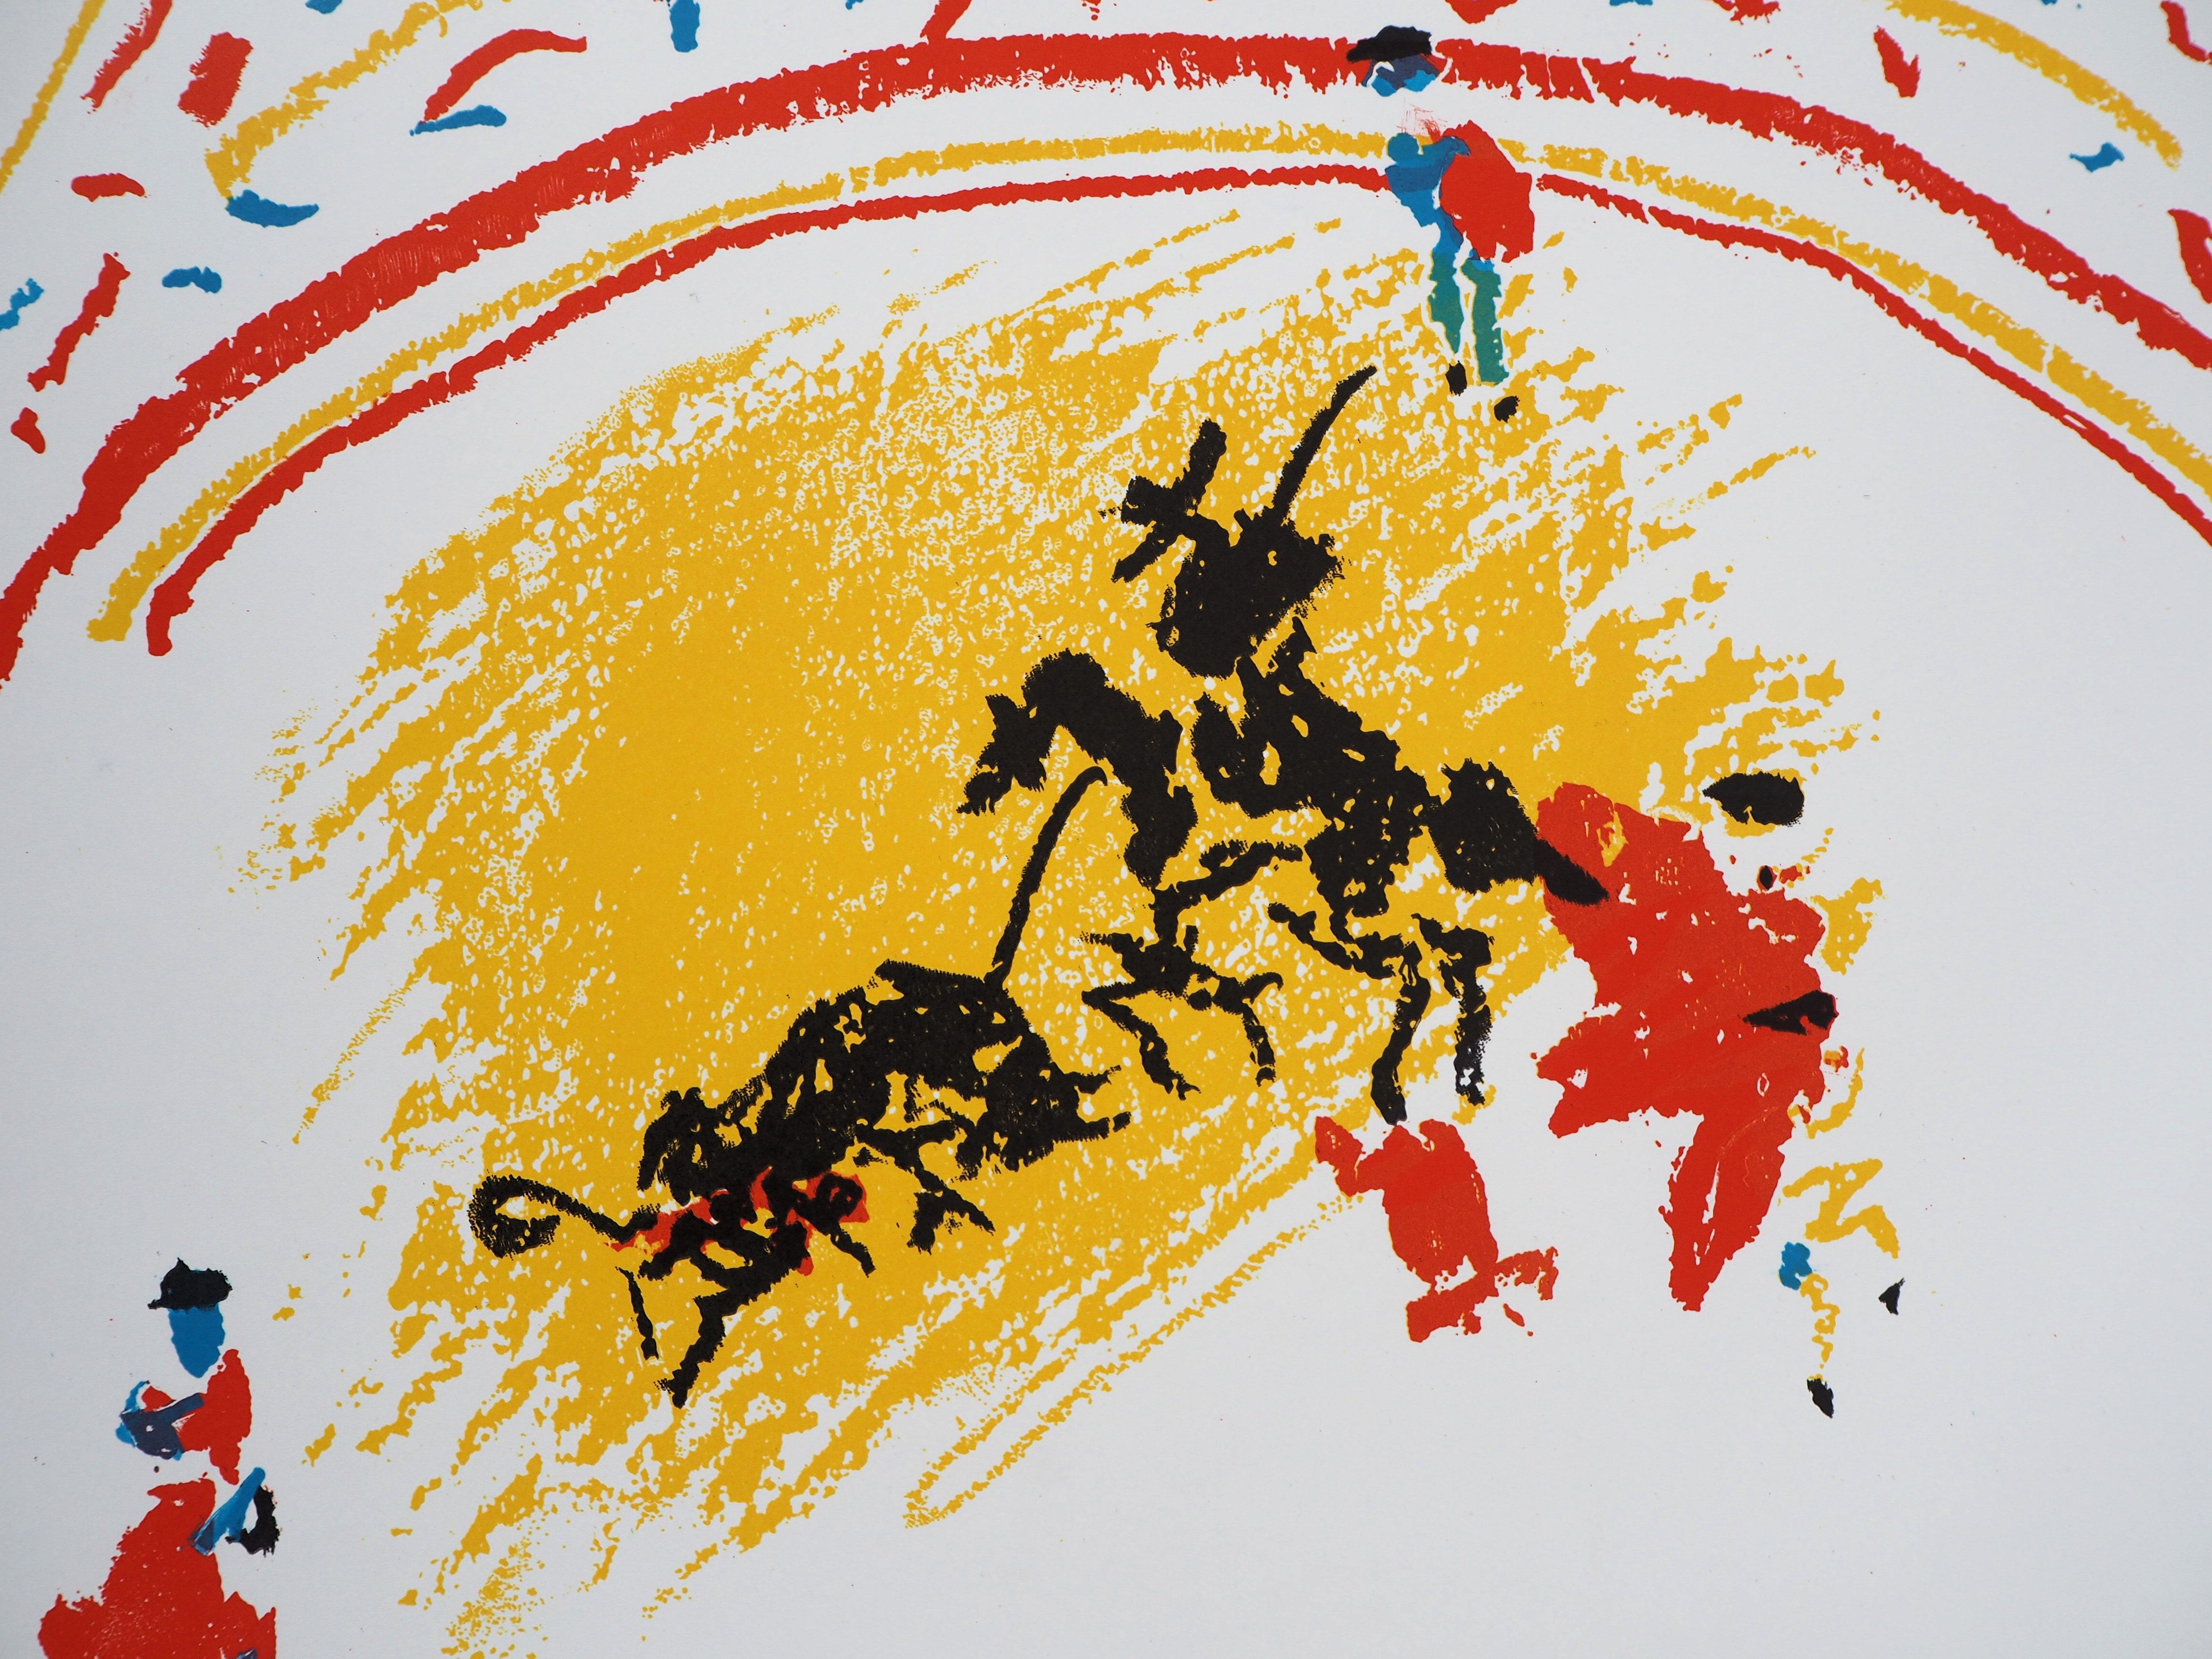 Pablo Picasso (after)
Bullfight, the Arena, 1982

Lithograph (printed in Atelier Mourlot)
Printed signature in the plate
On heavy paper 89 x 60 cm (c. 36 x 24 inch)
Original lithograph poster for the 1982 exhibition 'Picasso et la Tauromachie' at